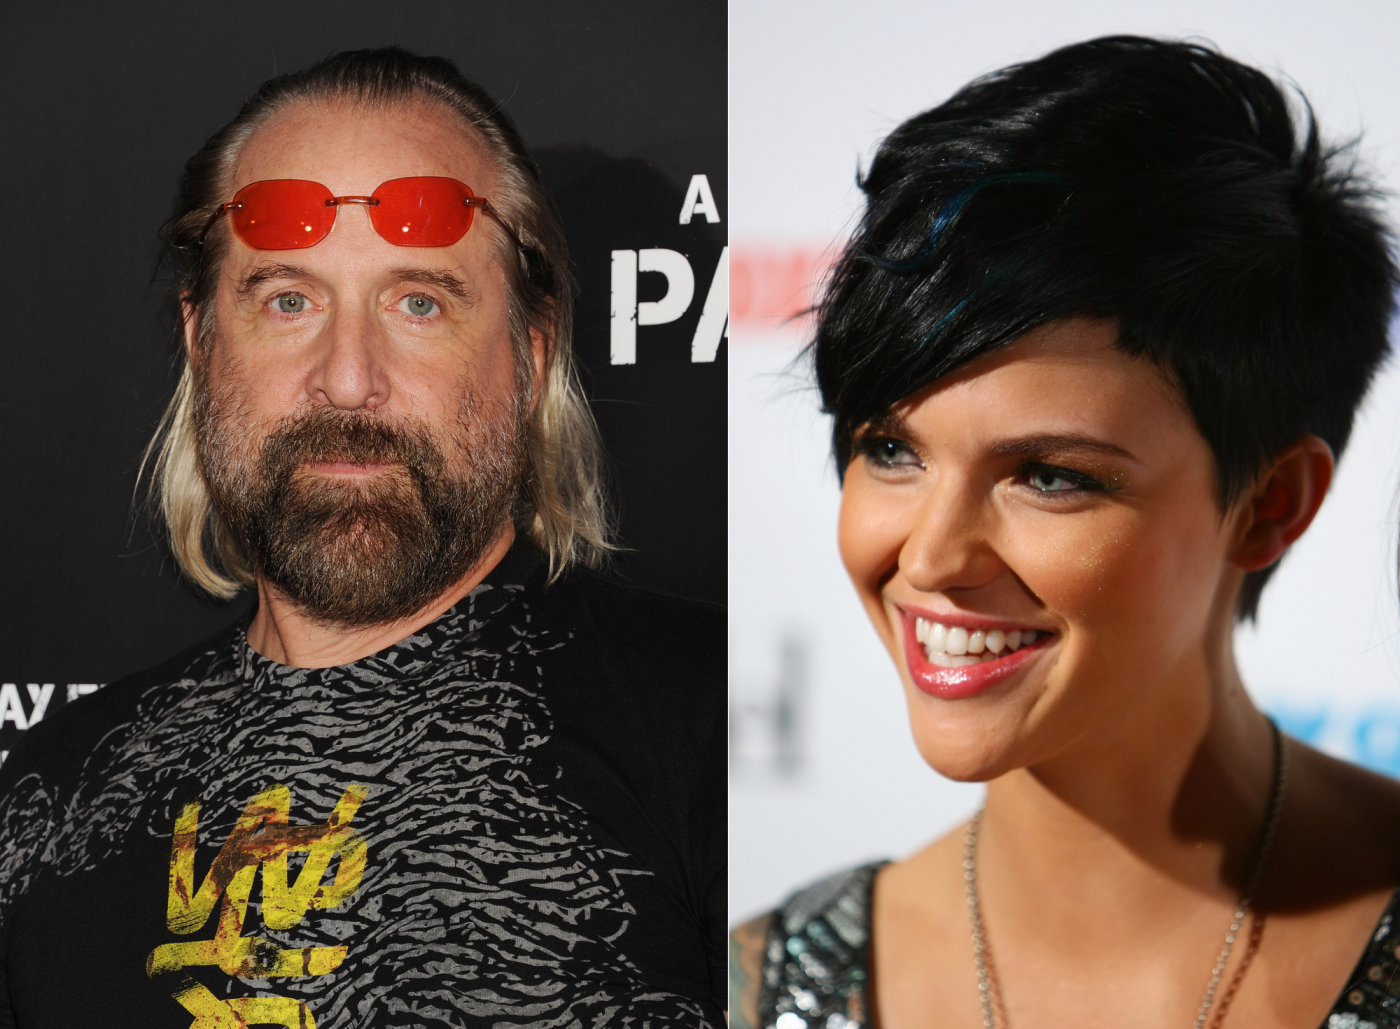 Peter Stormare / Ruby Rose